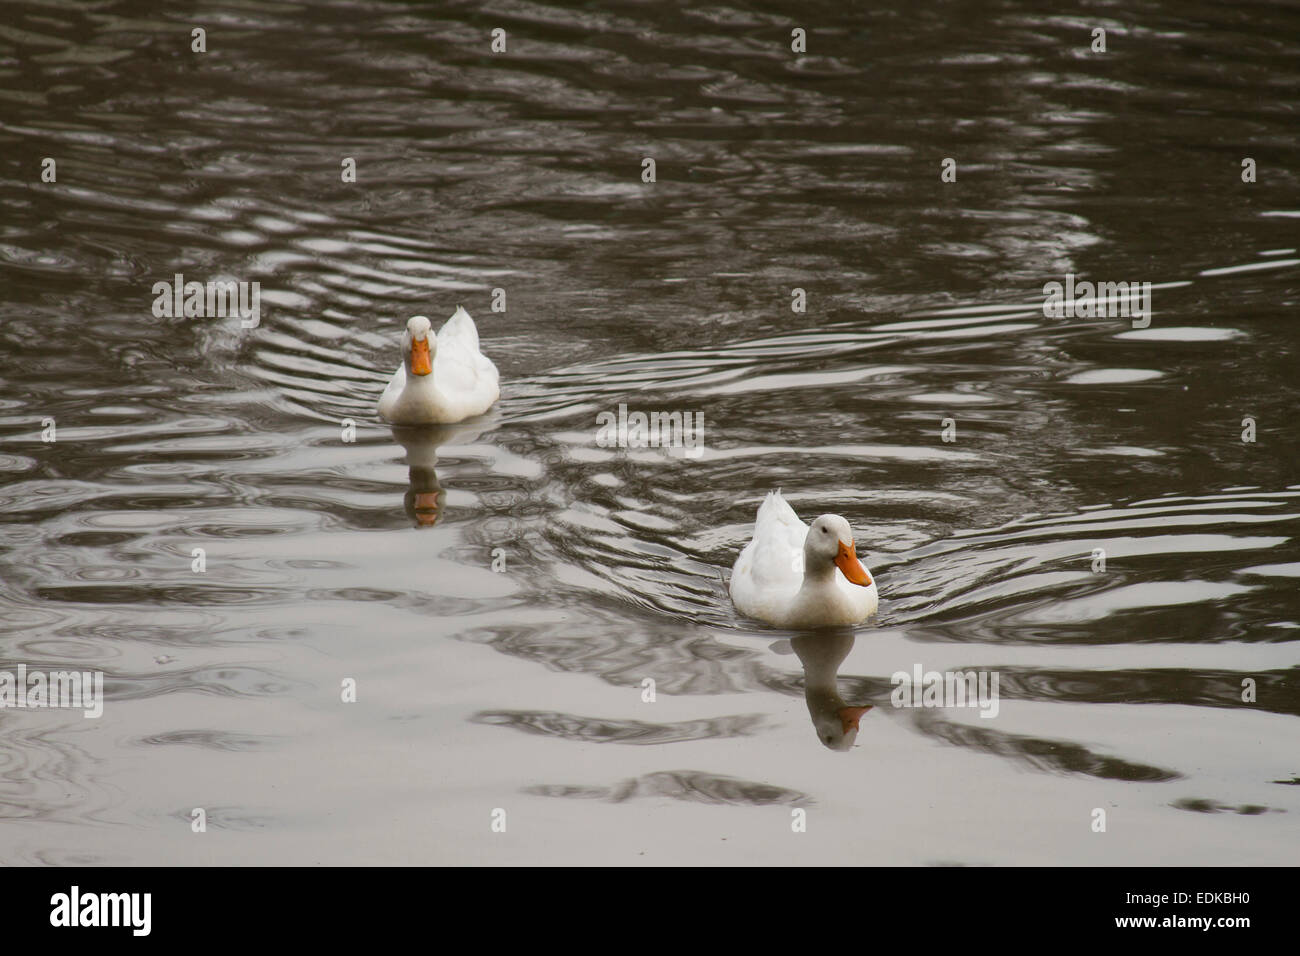 Two curious but wary white ducks on a lake swim closer for a better look Stock Photo